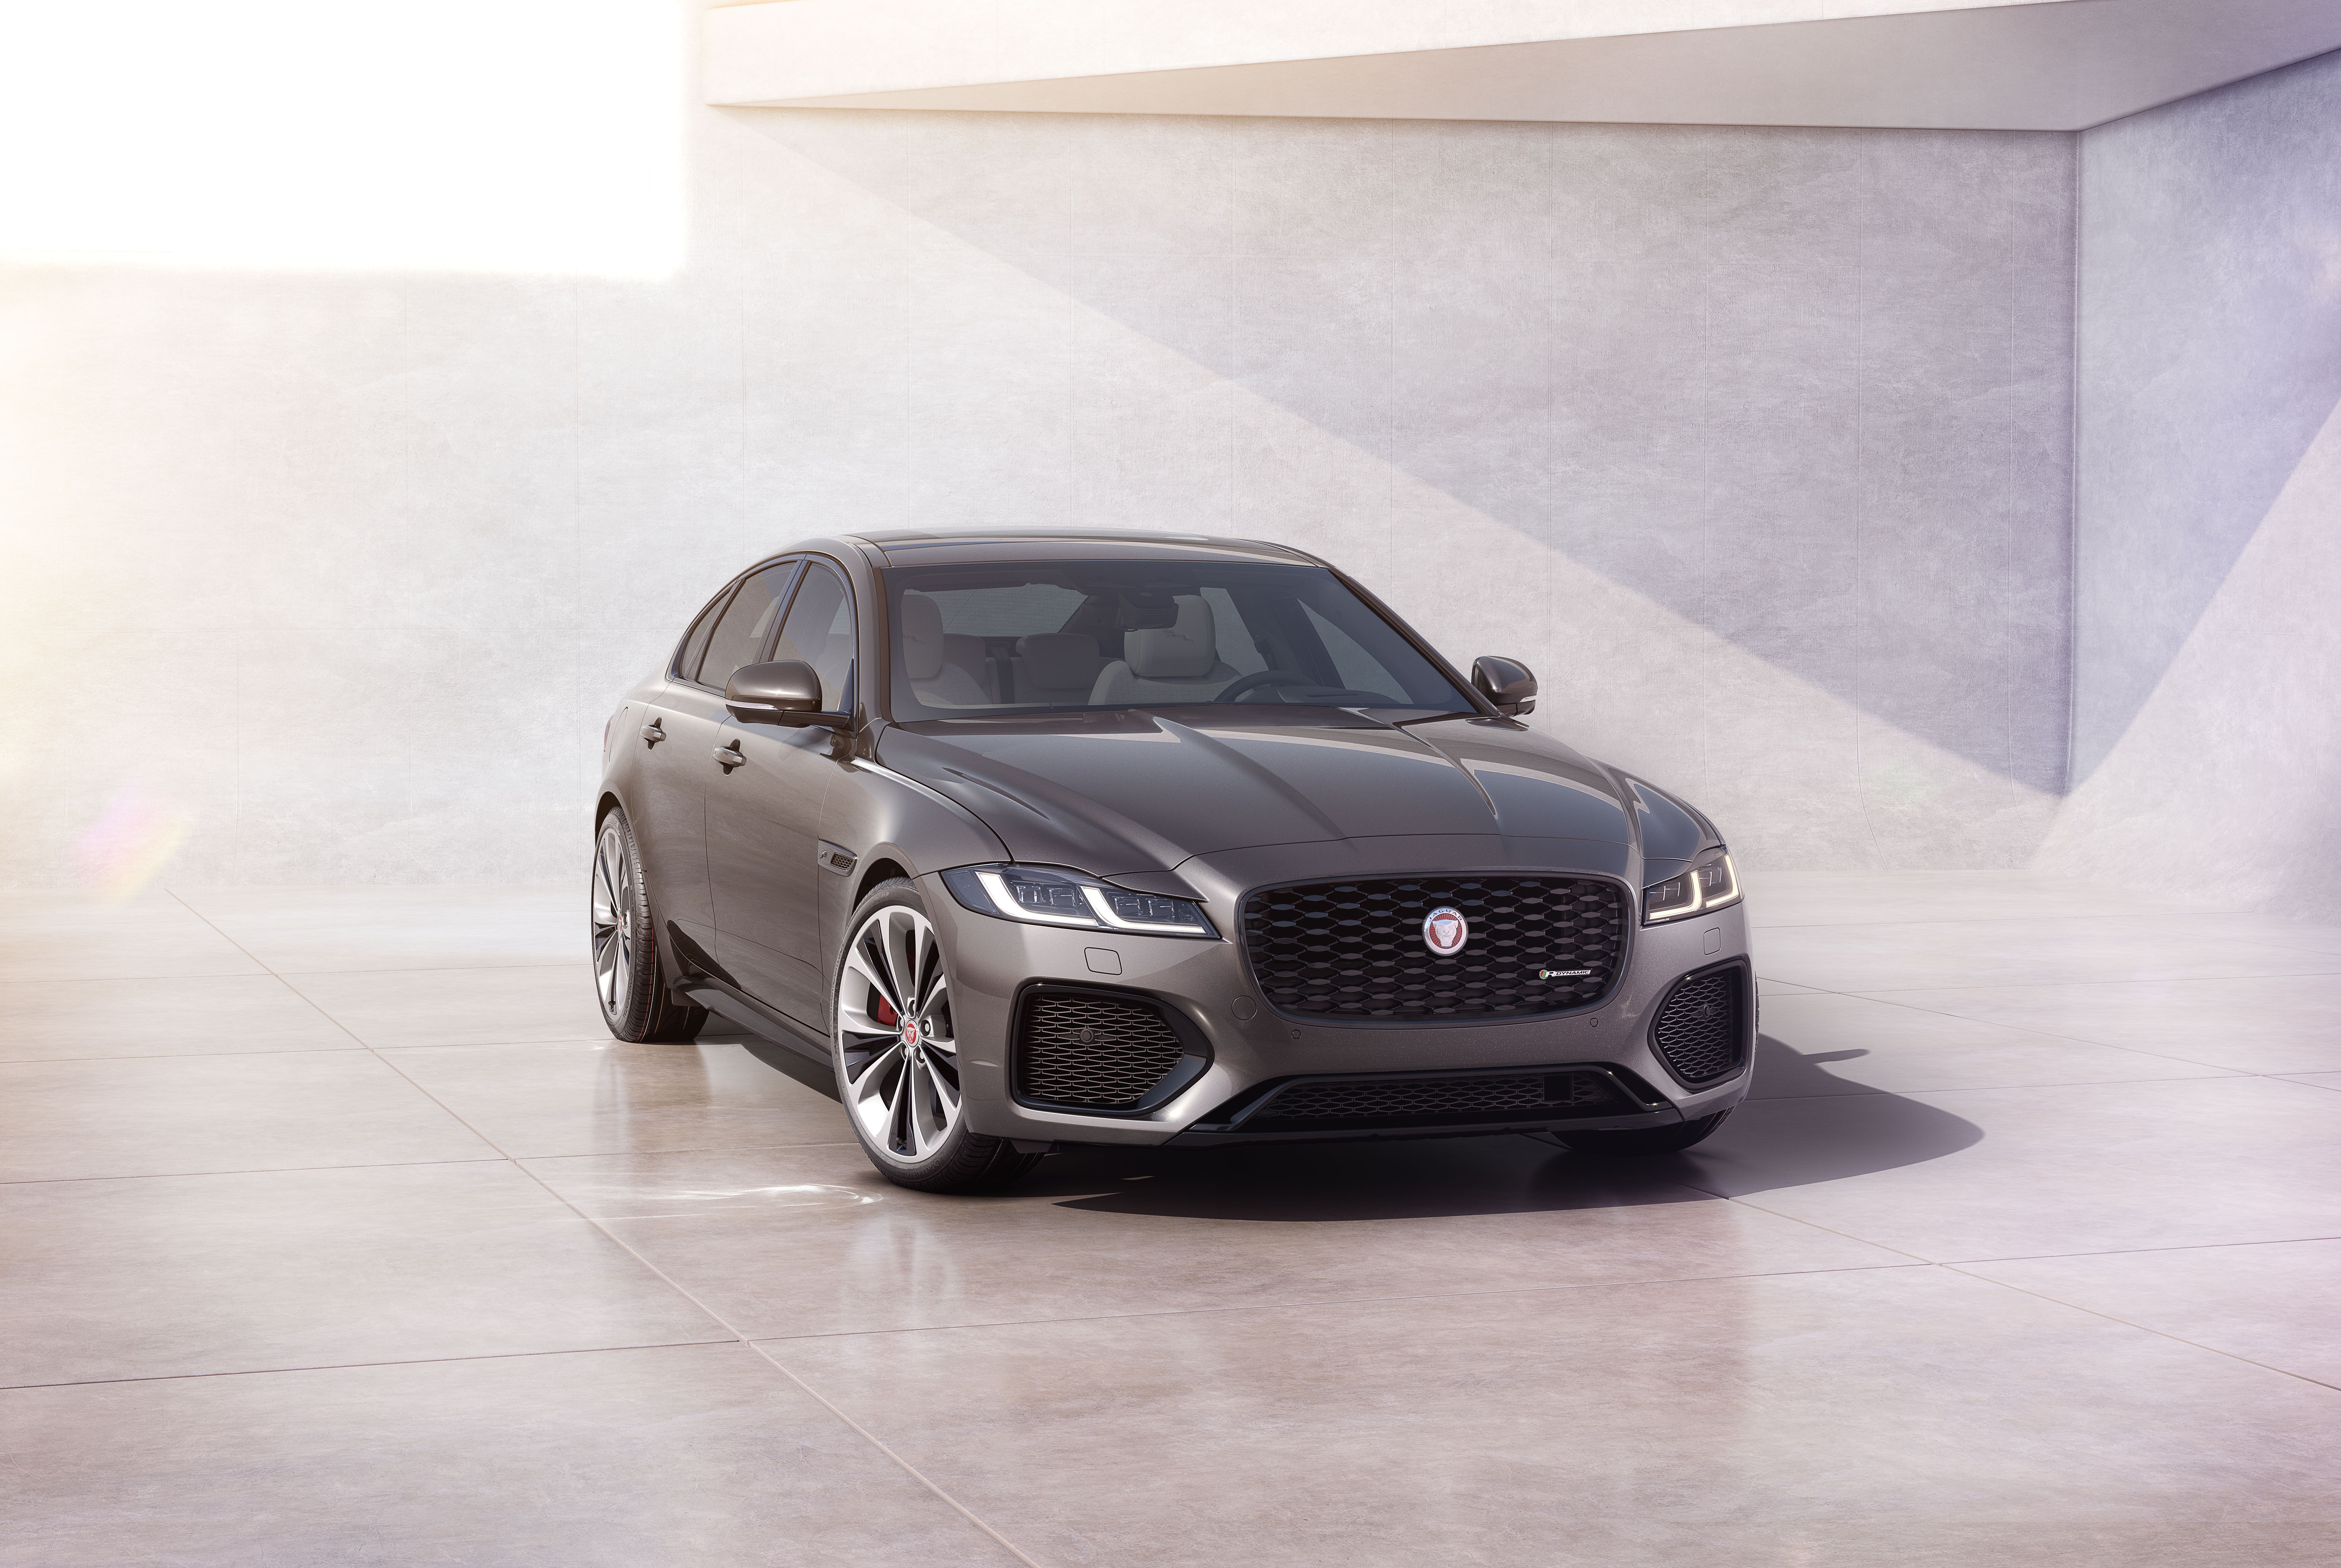 2022 Jaguar XF Review, Pricing, and Specs